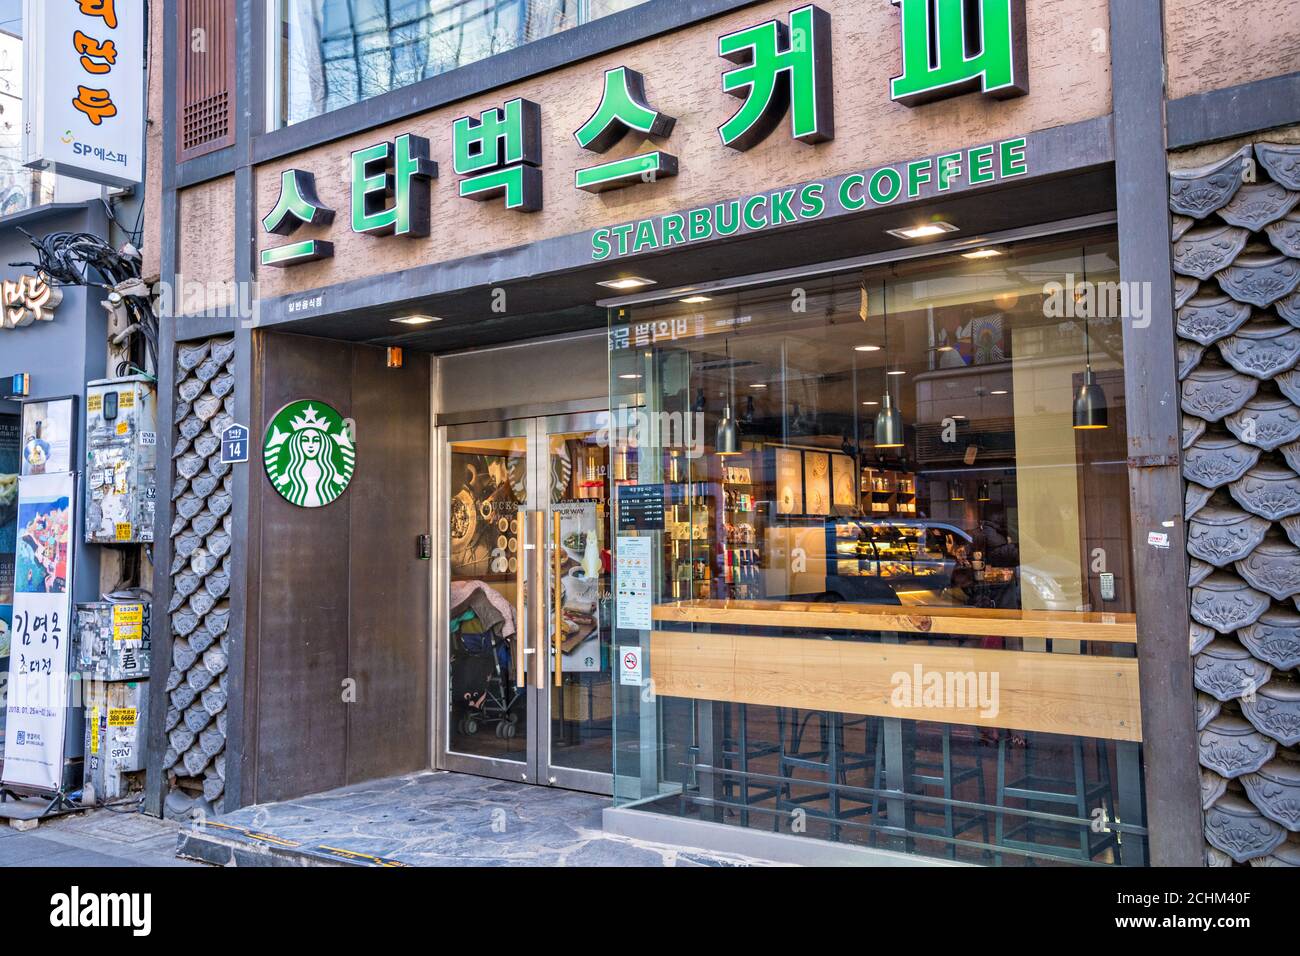 Starbucks Coffee shop in the Jongno-gu district of Seoul, South Korea. Starbucks has over 1,000 cafes throughout South Korea. This Starbucks in the only one in Asia where the outside signage is not written in English Stock Photo